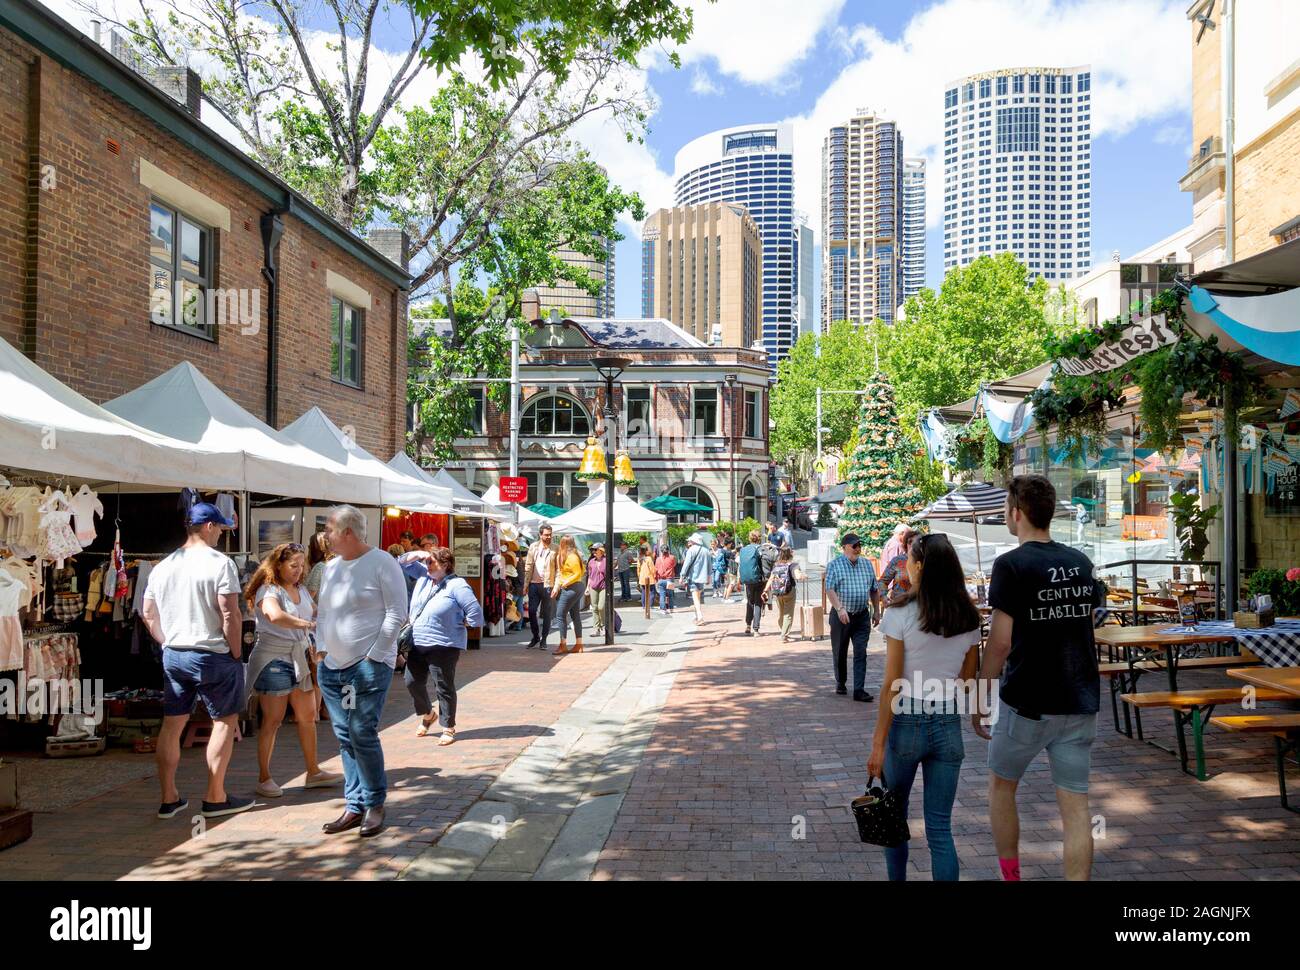 The Rocks market, Sydney Australia - people shopping at the stalls on a sunny day in summer, the Rocks, Sydney Australia Stock Photo